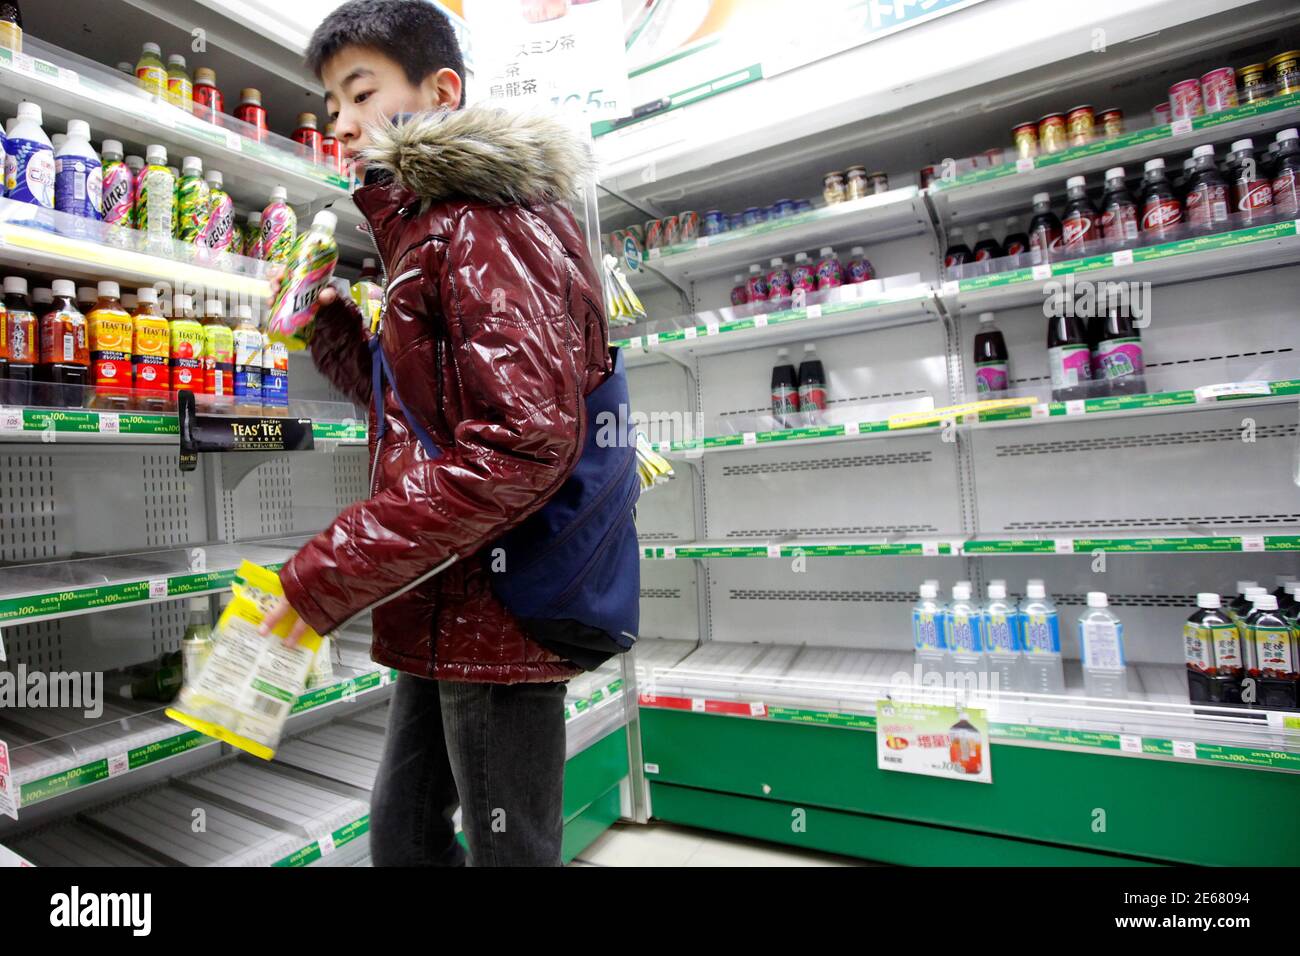 A customer stands near shelves of bottled drinks that are running out at a convenience store in central Tokyo March 24, 2011. Many shops in Tokyo ran out of bottled water on Thursday after radiation from a damaged nuclear plant made tap water unsafe for babies, while more countries imposed curbs on imports of Japanese food. Engineers are trying to stabilise the Fukushima nuclear facility nearly two weeks after an earthquake and tsunami battered the complex and devastated northeast Japan.   REUTERS/Aly Song (JAPAN - Tags: DISASTER FOOD SOCIETY) Stock Photo